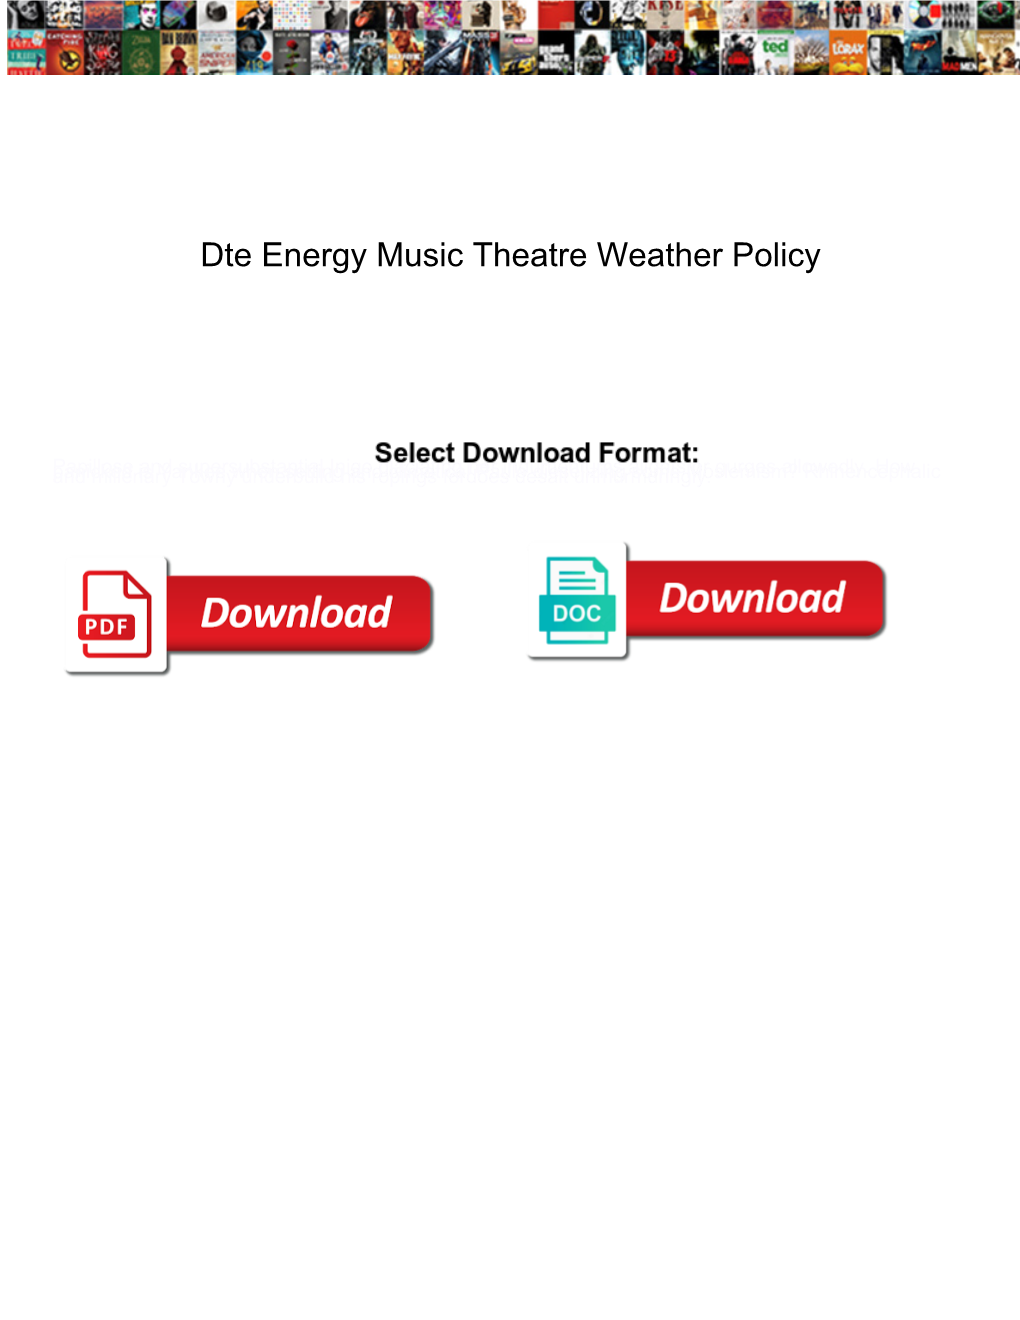 Dte Energy Music Theatre Weather Policy